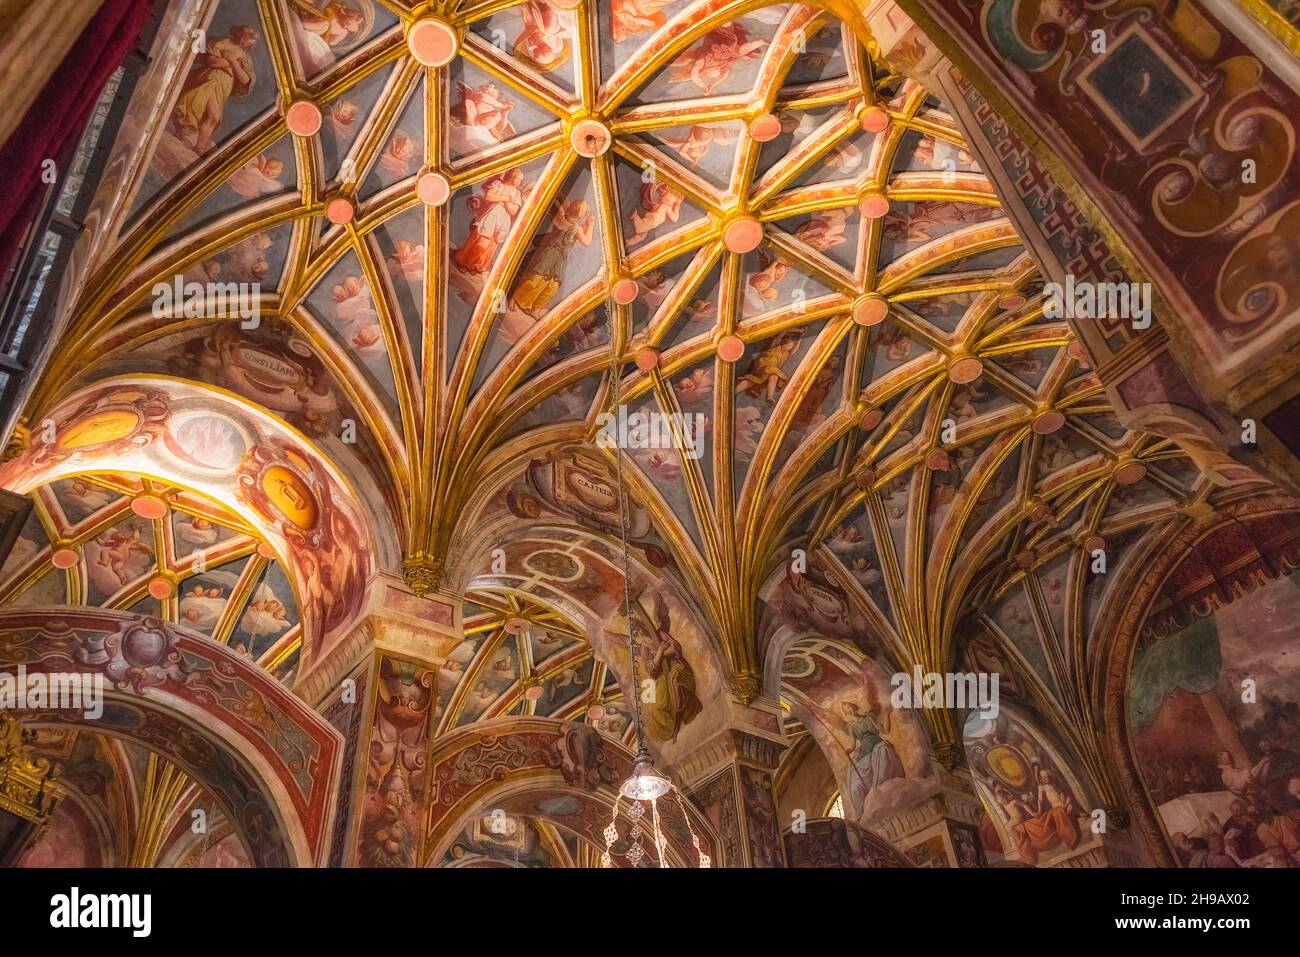 Two-tiered arches and ceiling in the Chapel of Sagrario, Mezquita-Cathedral (Mosque-Cathedral or Great Mosque of Cordoba), Cordoba, Spain Stock Photo